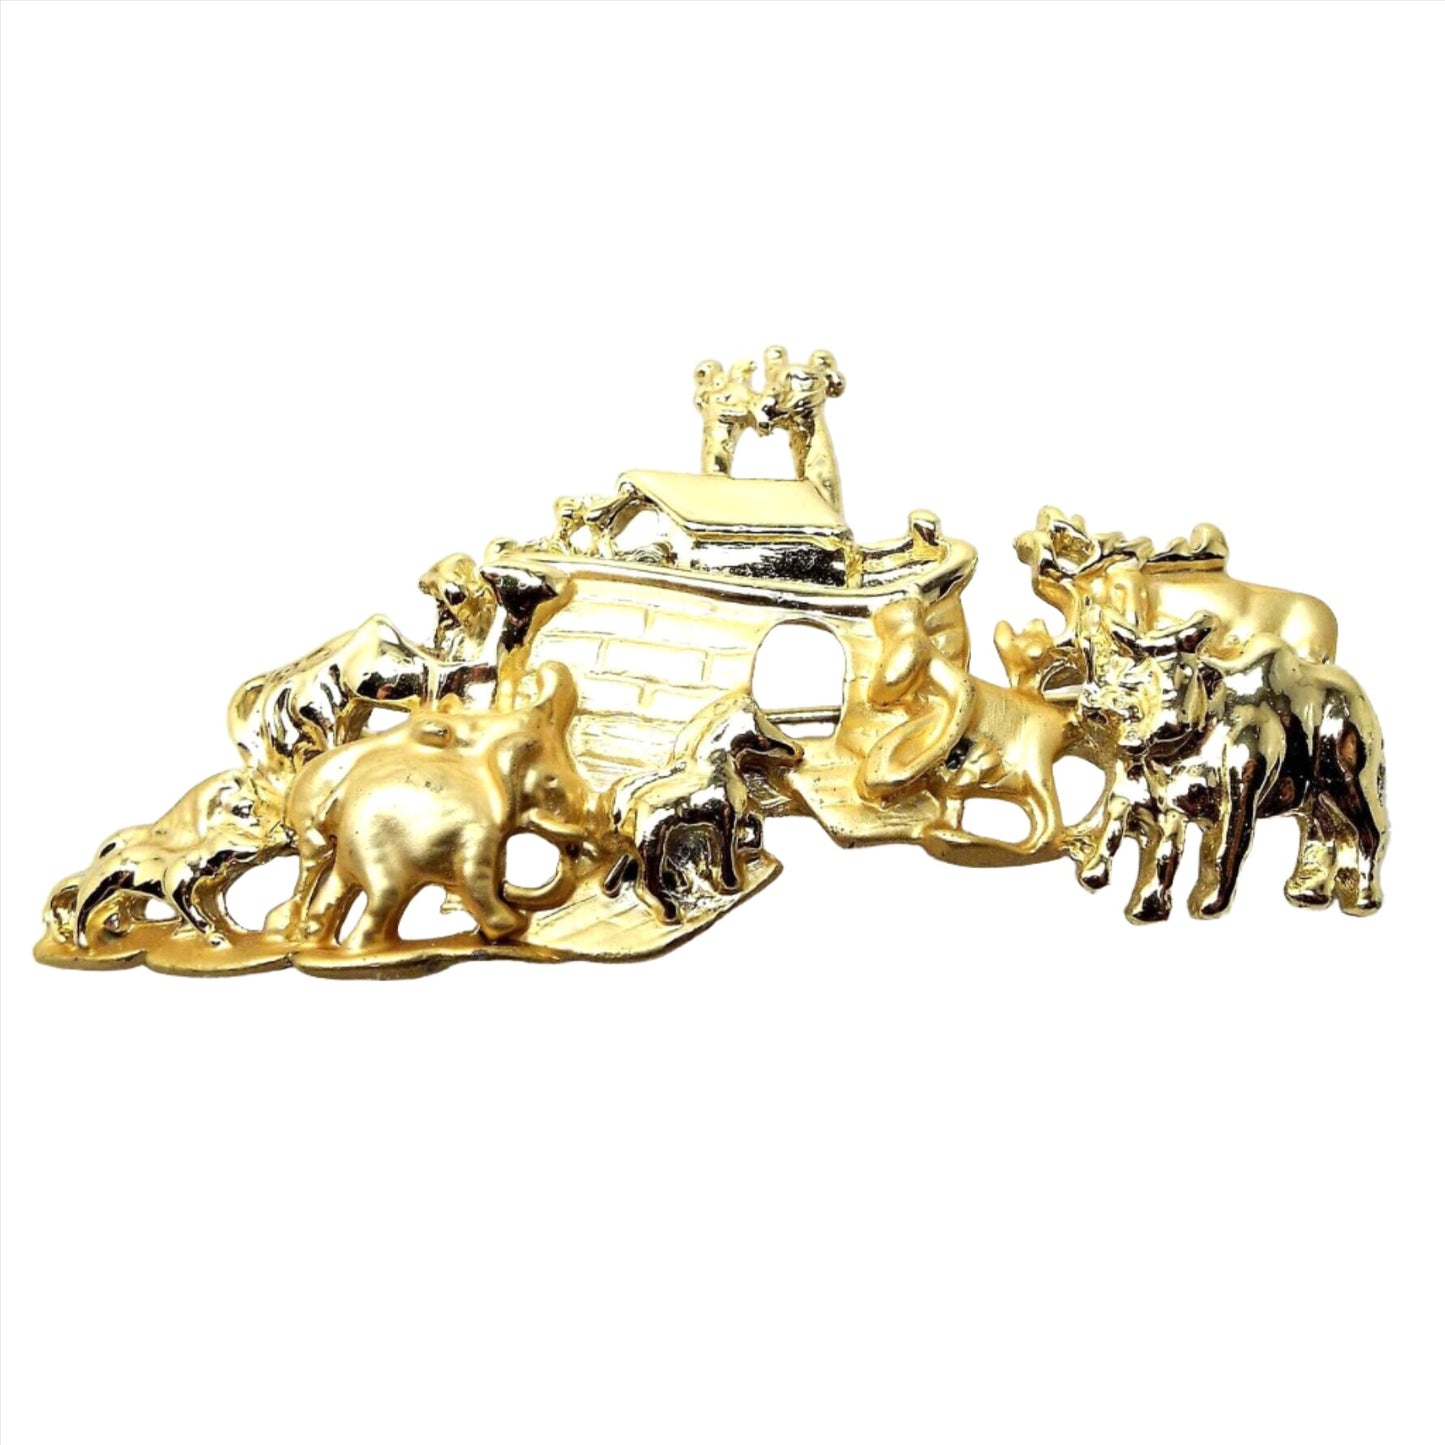 Front view of the retro vintage AJC Noah's Ark brooch pin. It is matte and shiny gold in color. The ark has an open doorway and is surrounded by a variety of animals.